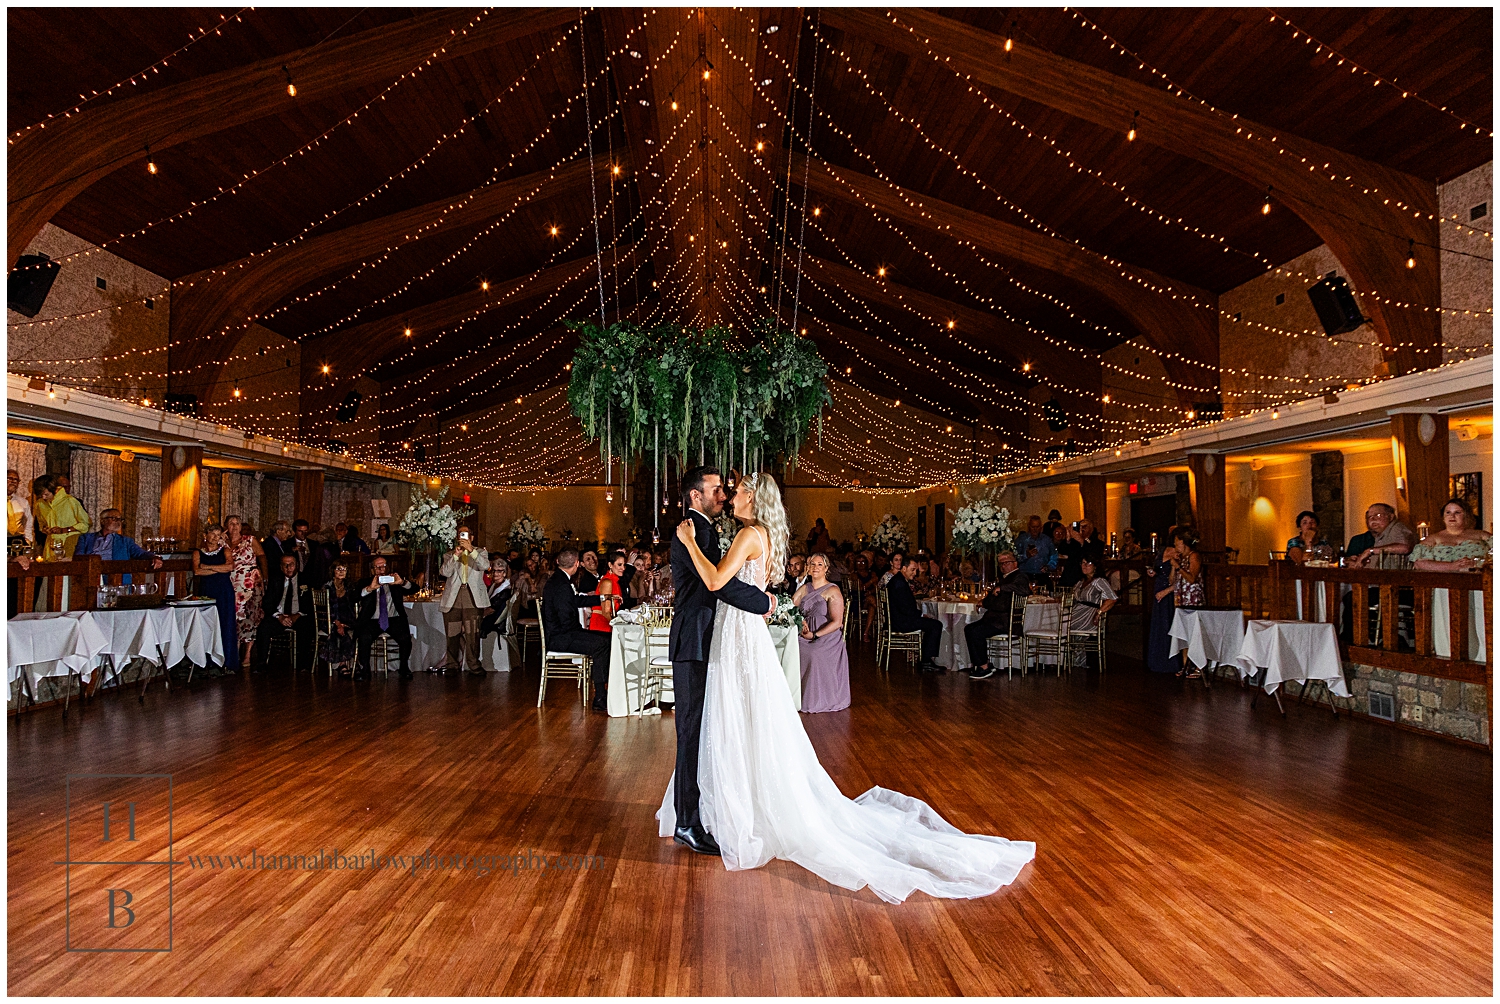 Bride and groom embrace for first dance with guests and tables in background under gold lights.